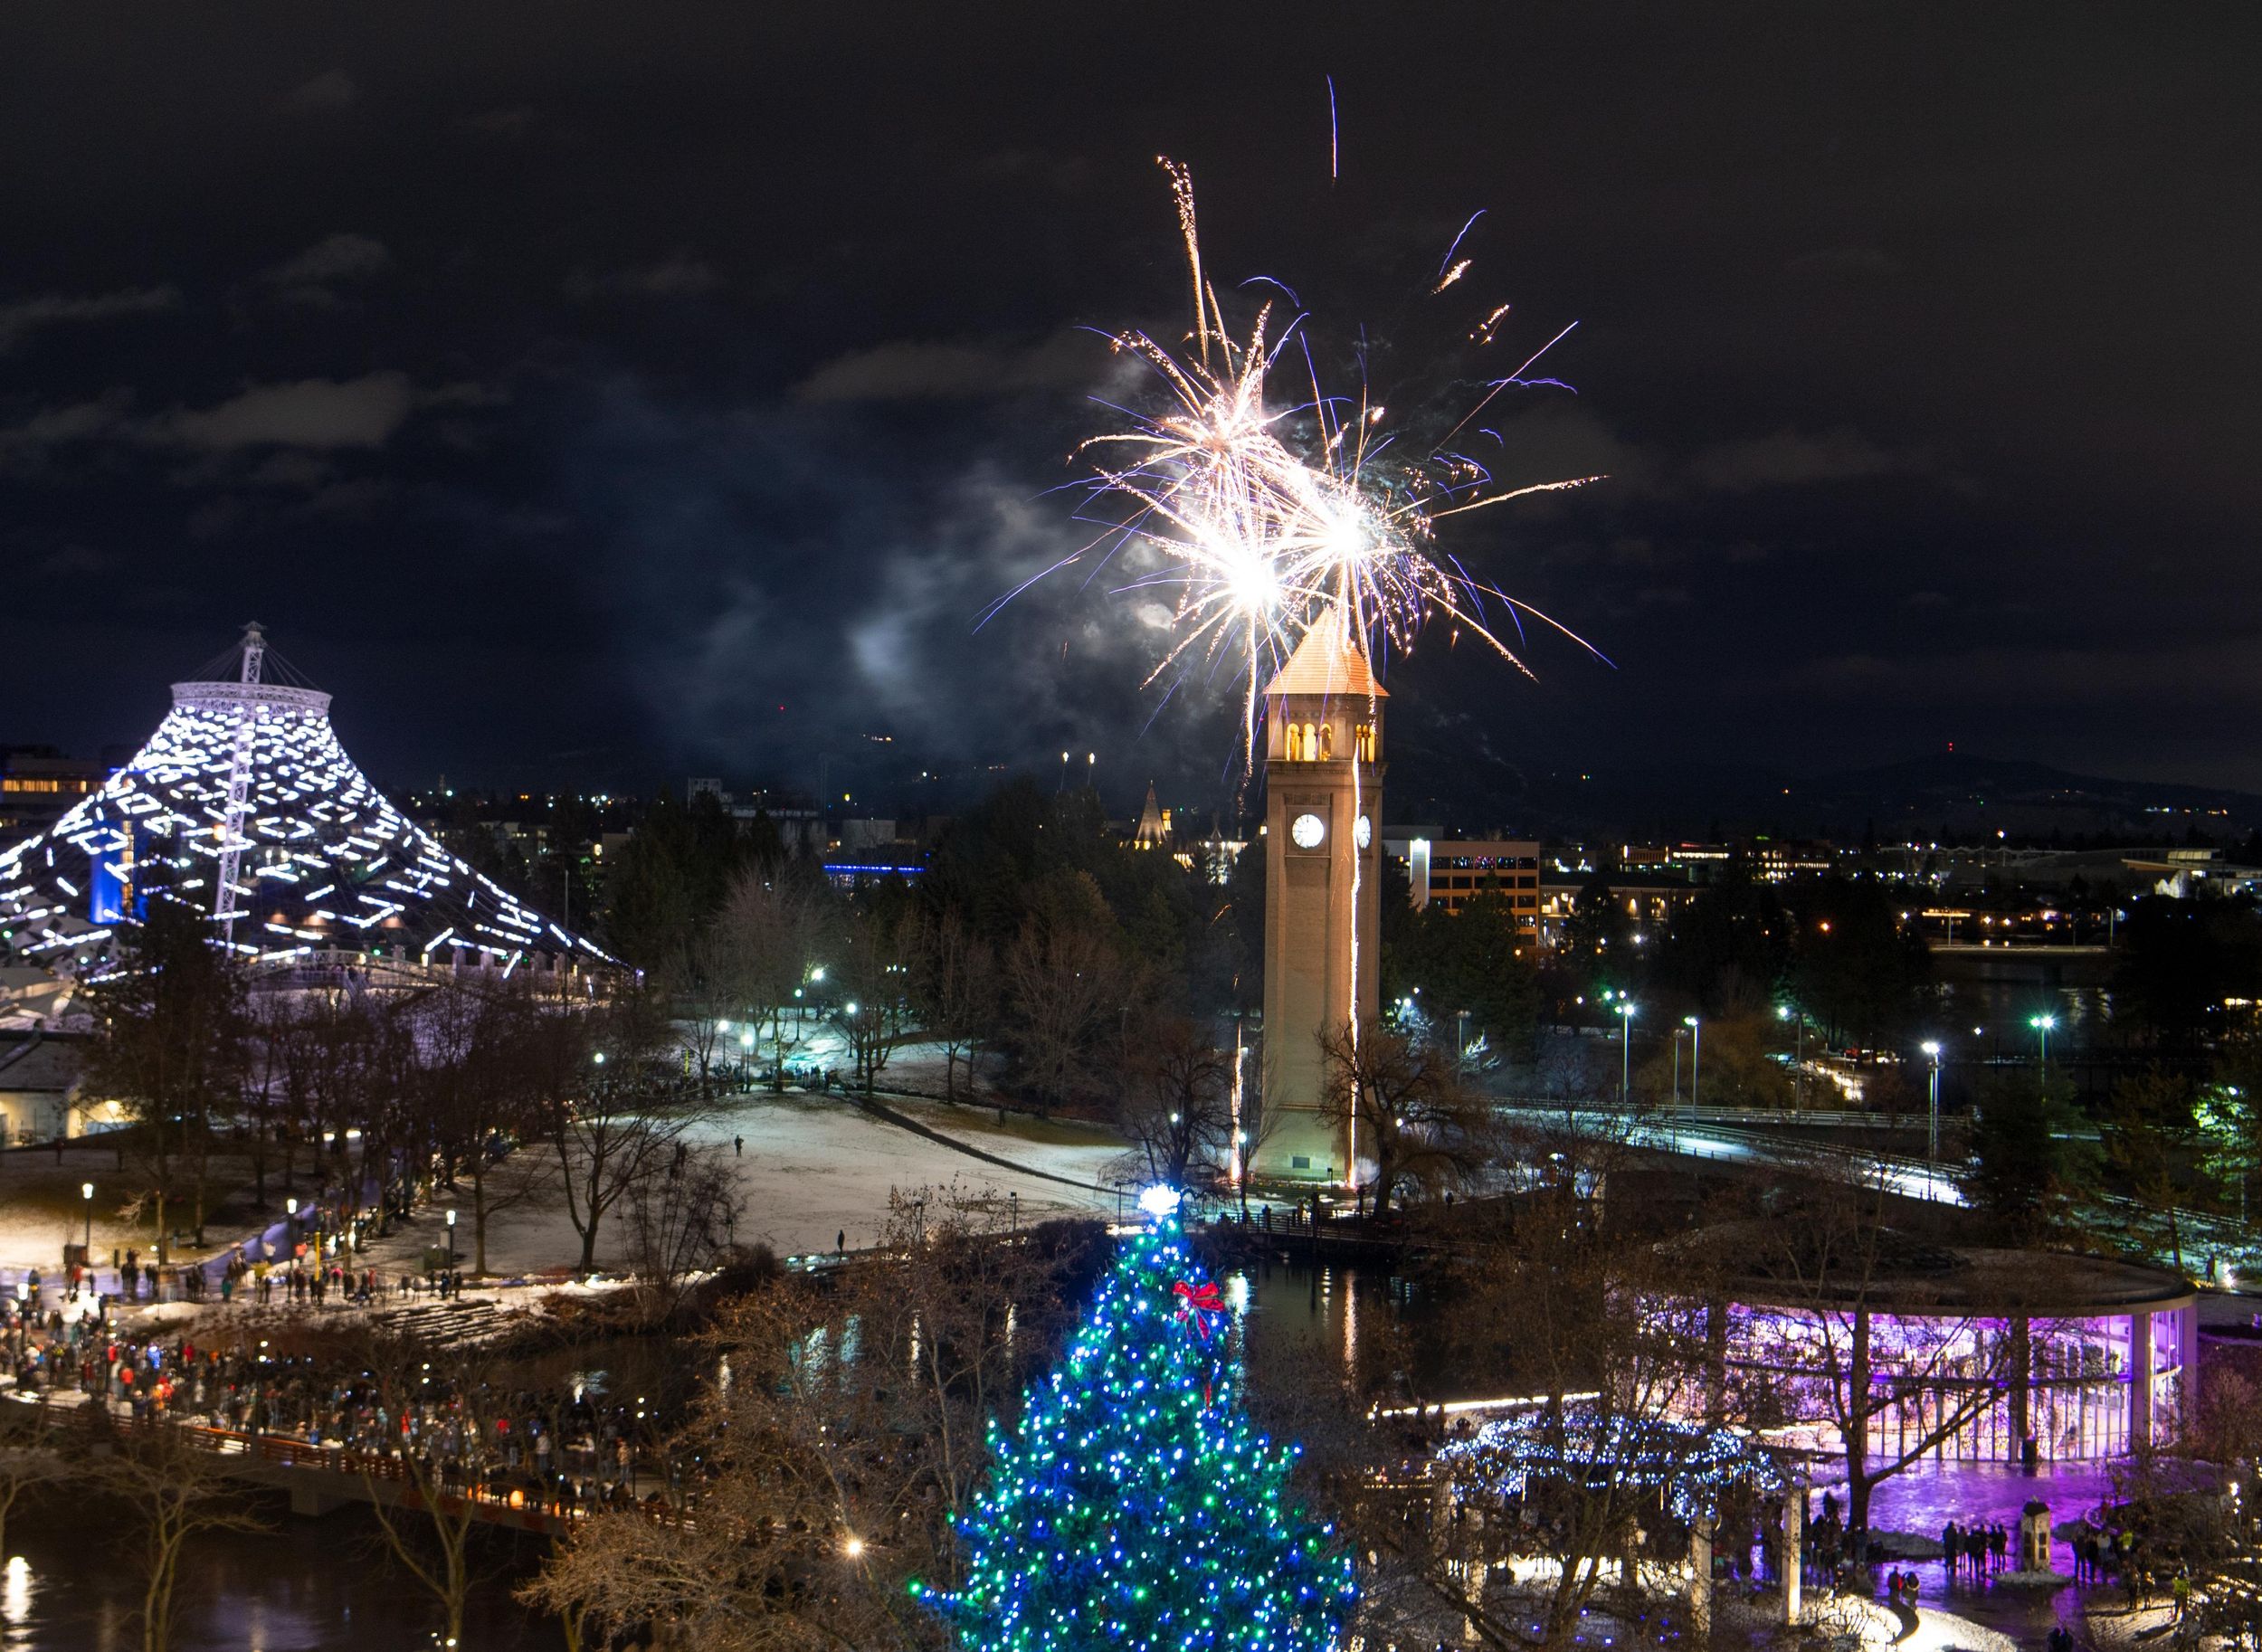 New Year's Eve fireworks in Riverfront Park Dec. 31, 2019 The